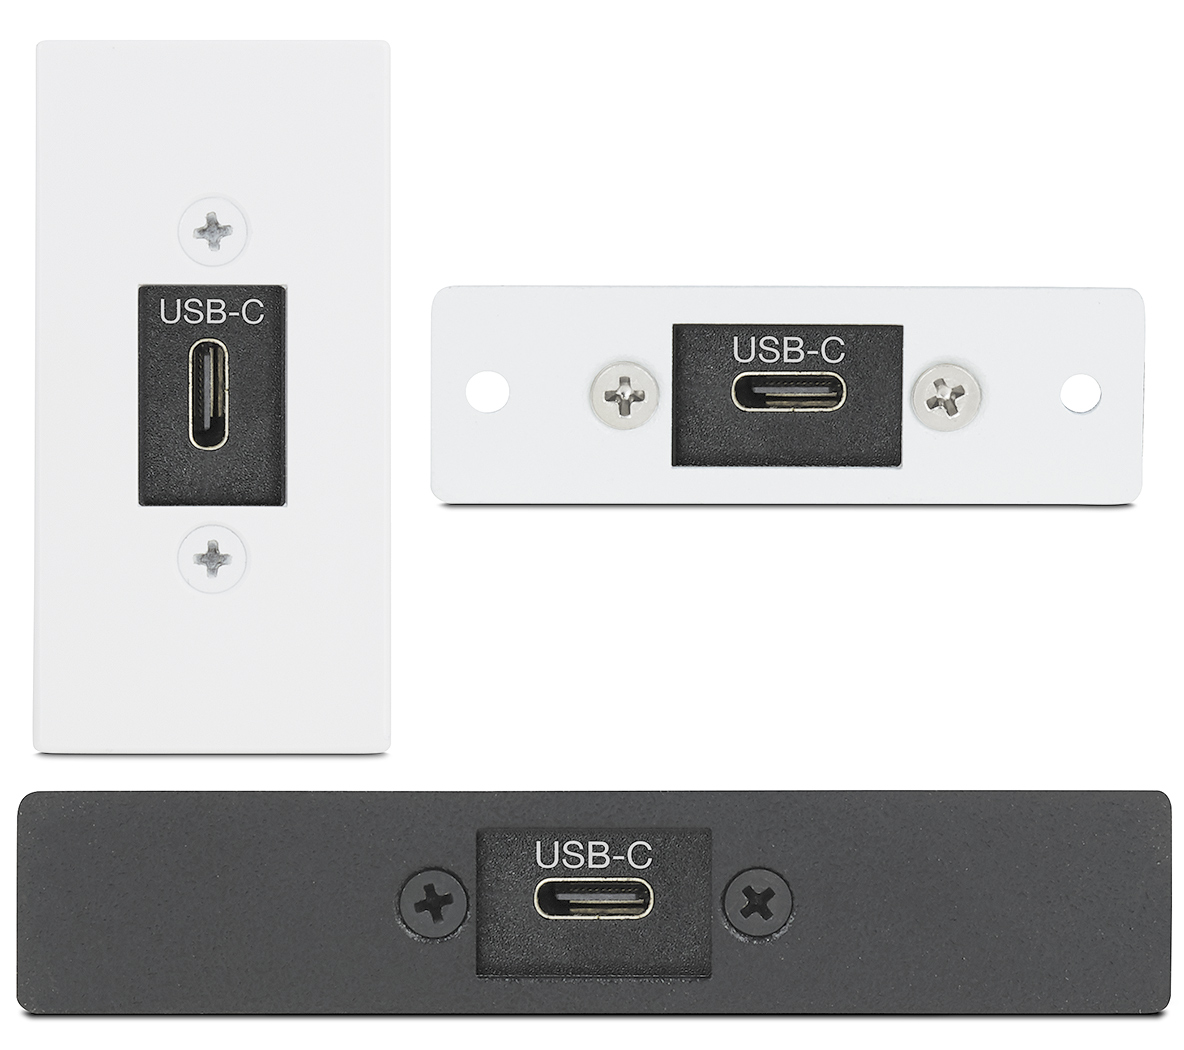 USB-C AV modules are available in an AAP, MAAP, and Flex55 styles in black and/or white